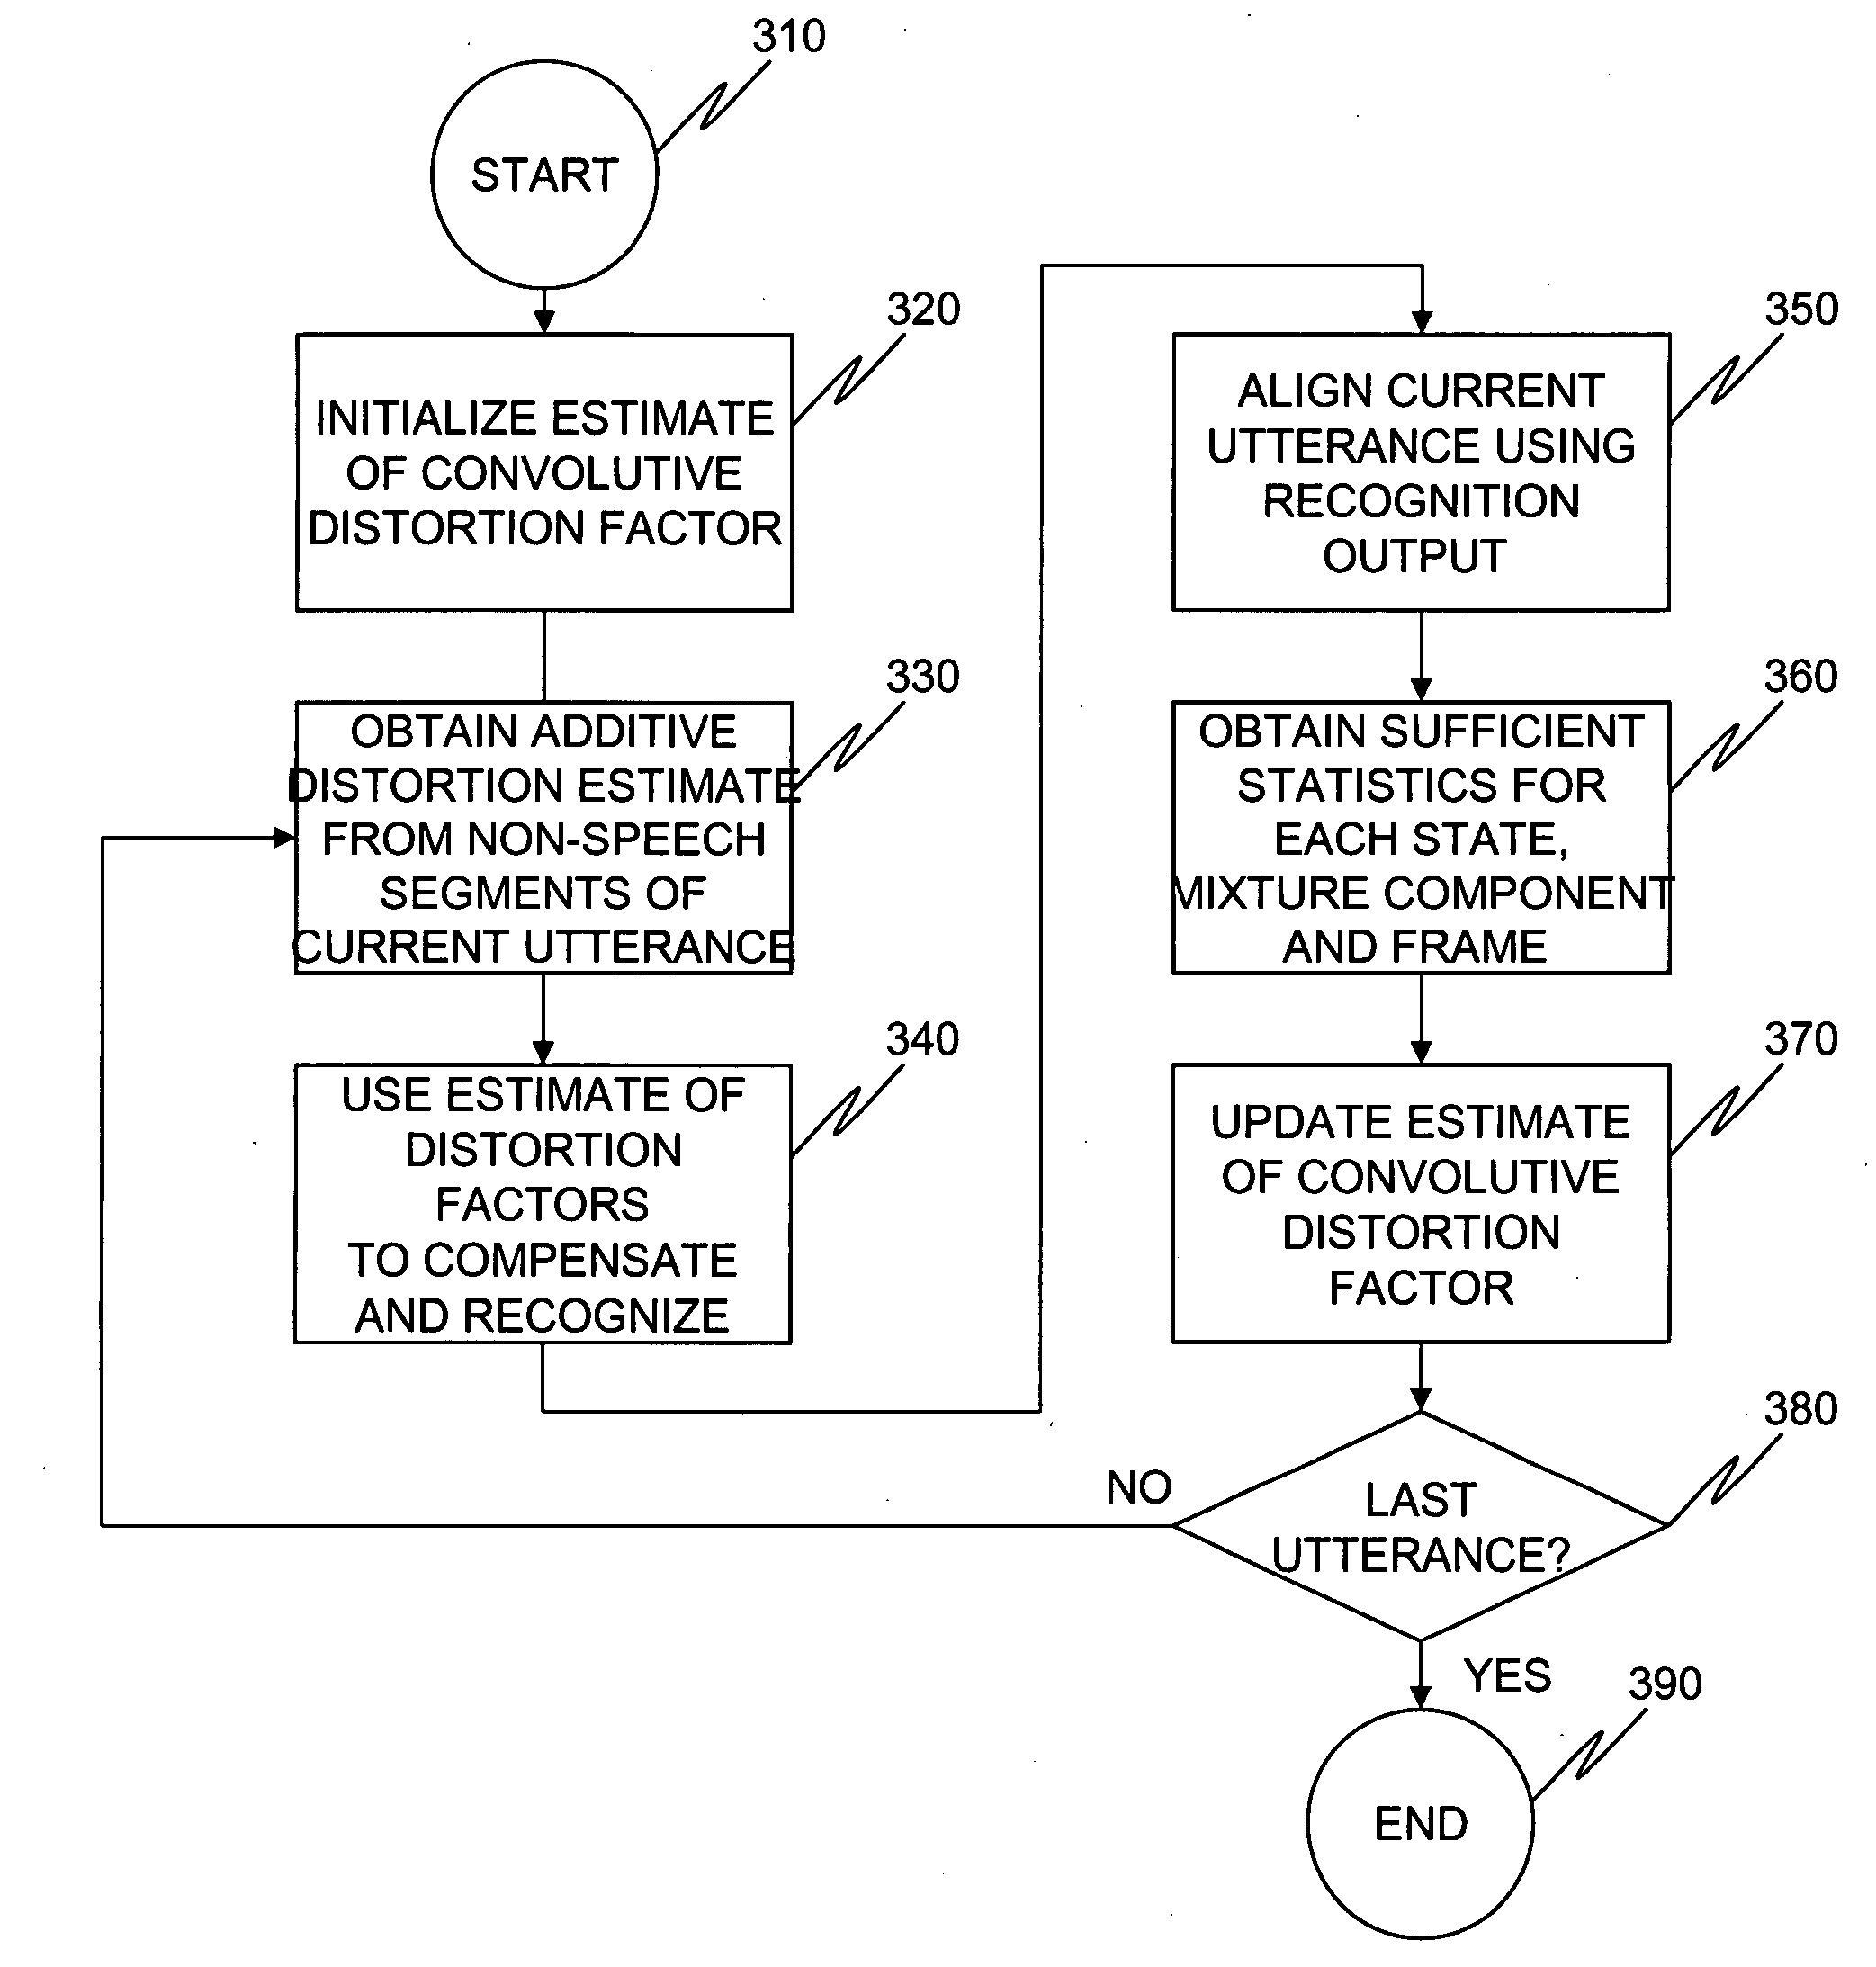 System and method for noisy automatic speech recognition employing joint compensation of additive and convolutive distortions